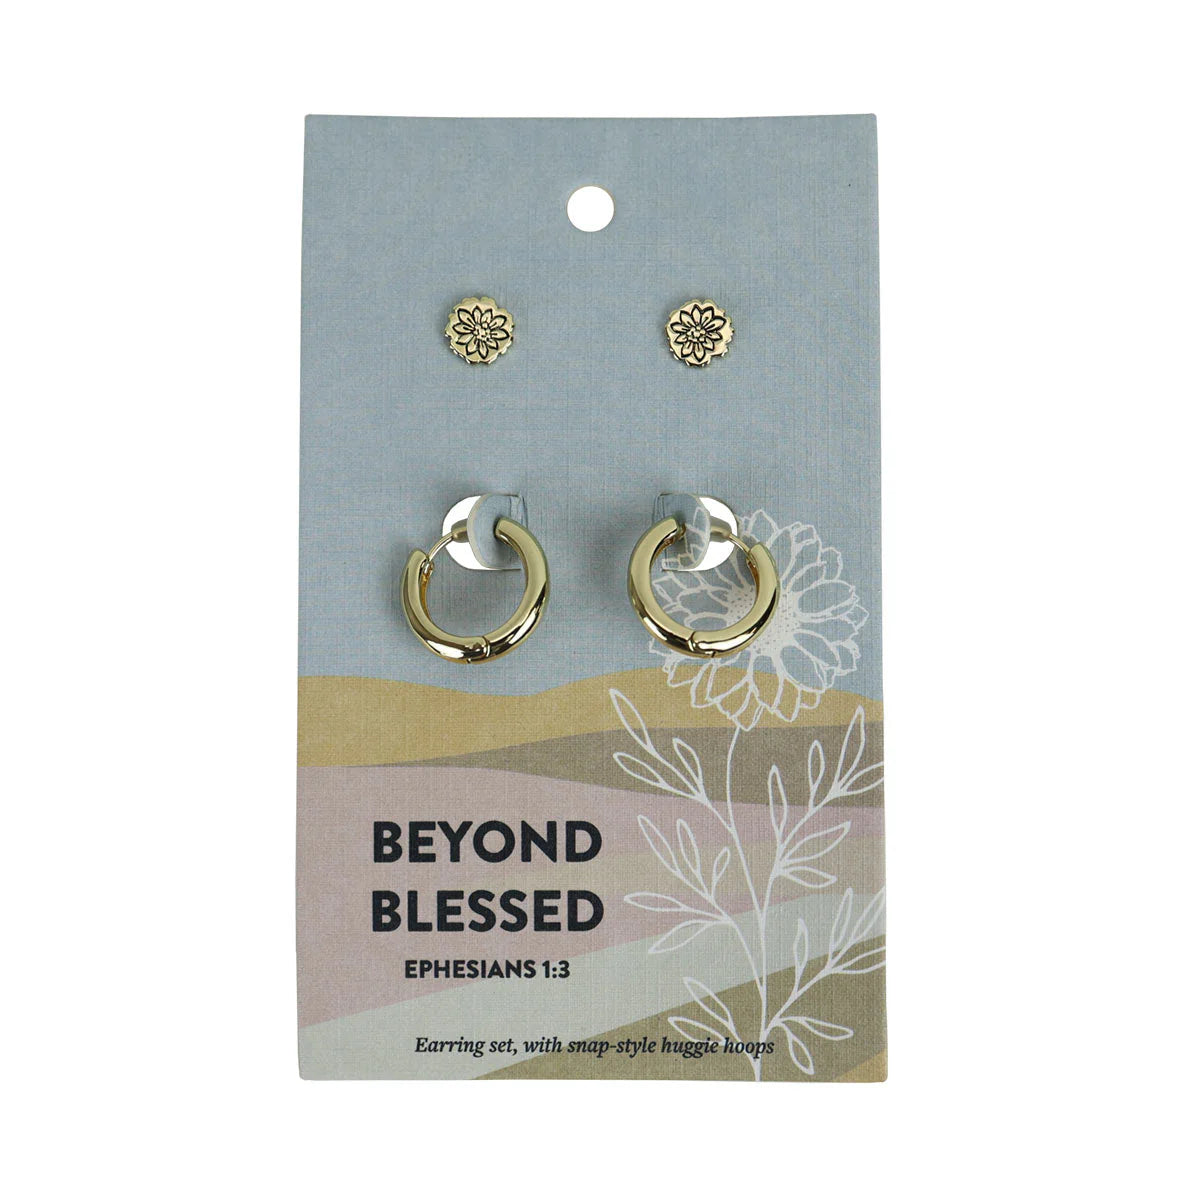 grace & truth Womens Earrings Beyond Blessed grace & truth® accessories jewelry Women's